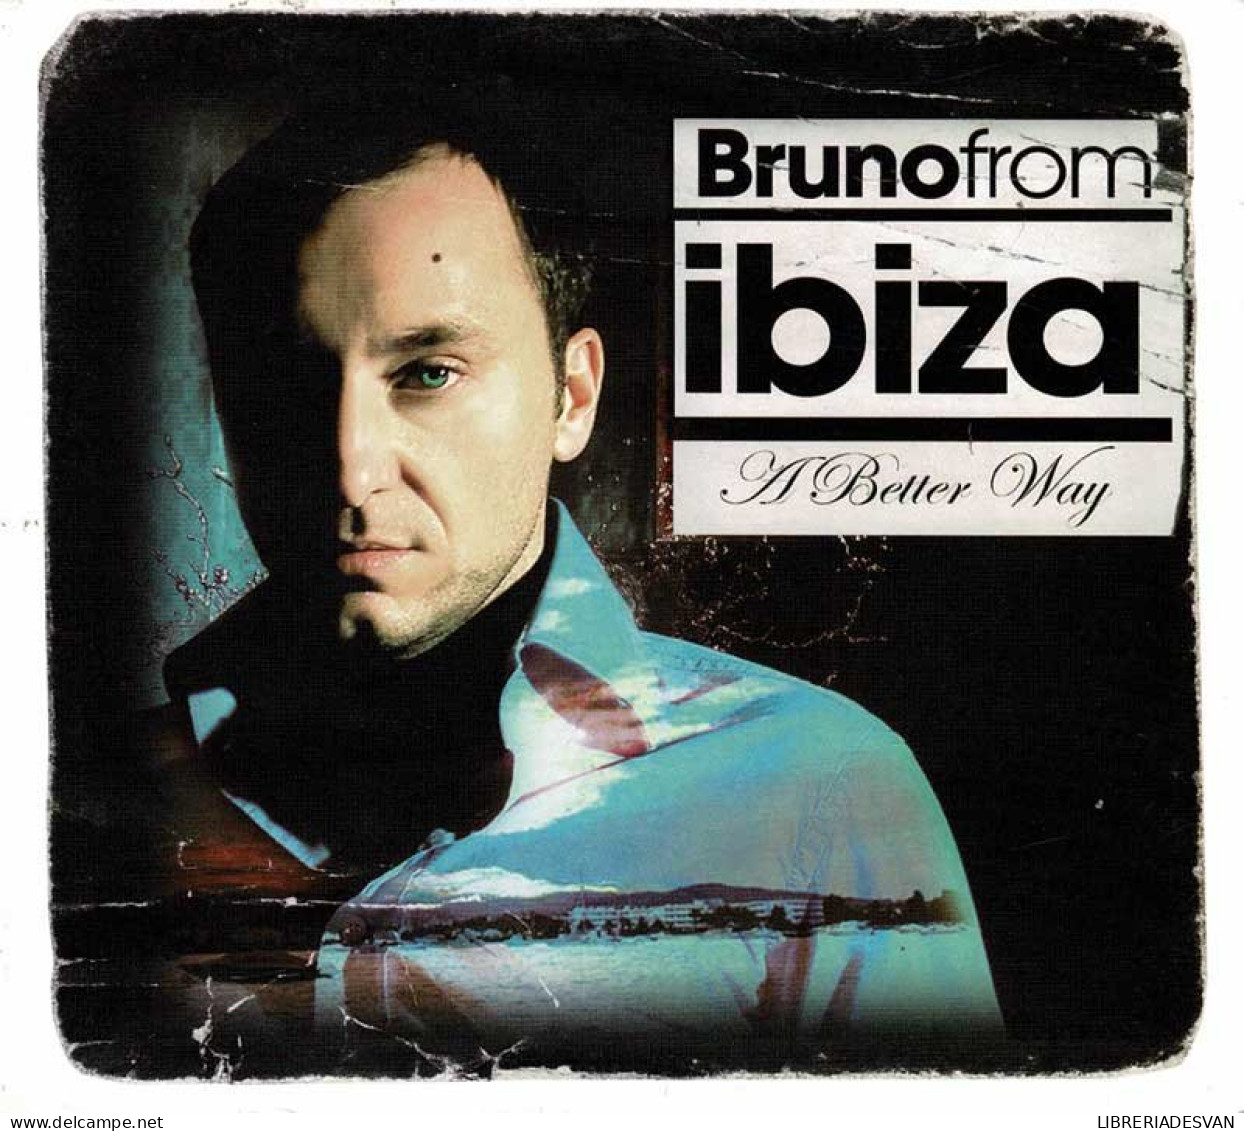 Bruno From Ibiza - A Better Way. CD - Dance, Techno & House